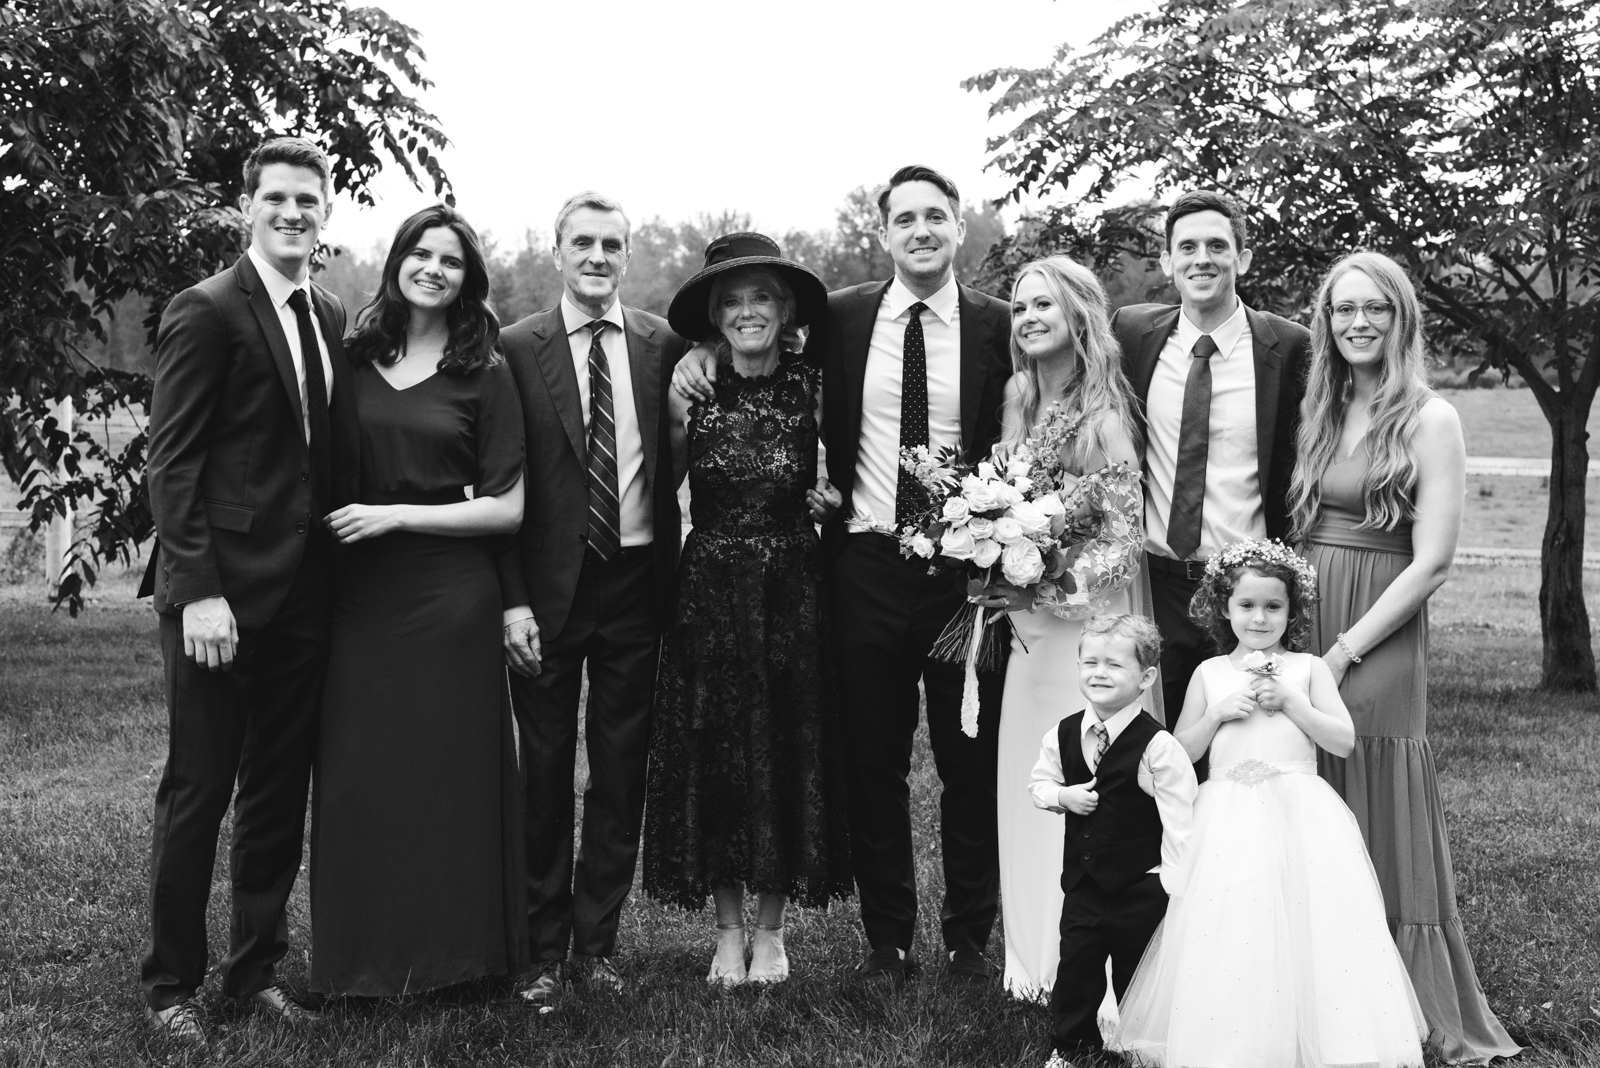 family portrait in black and white at family farm wedding